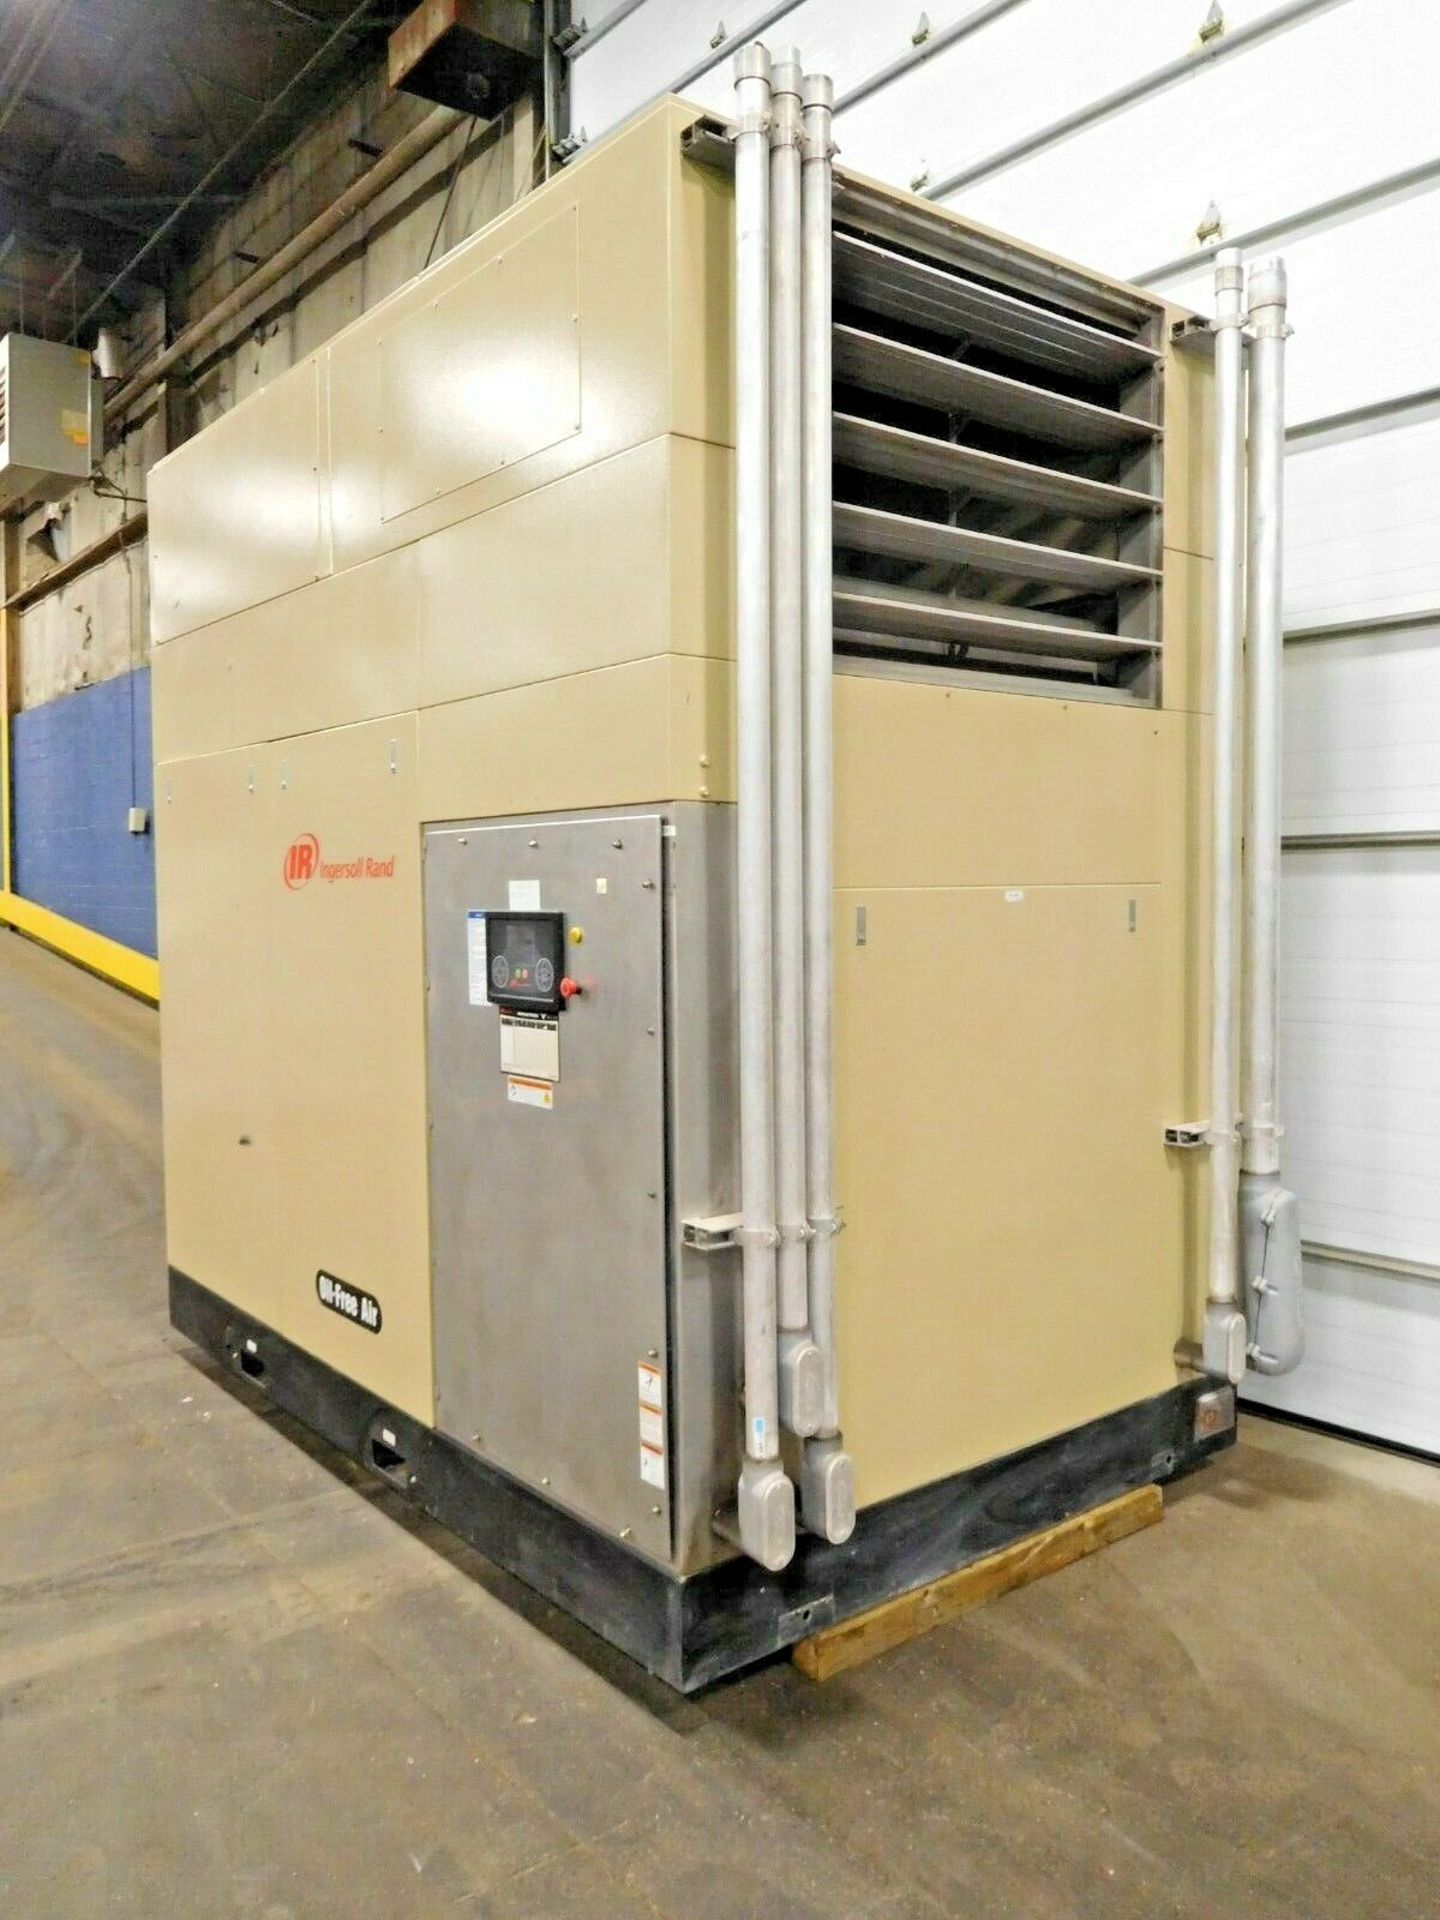 Ingersoll Rand H300 Rotary Screw Air Compressor. 1264 ACFM. 350 HP. - Image 2 of 7